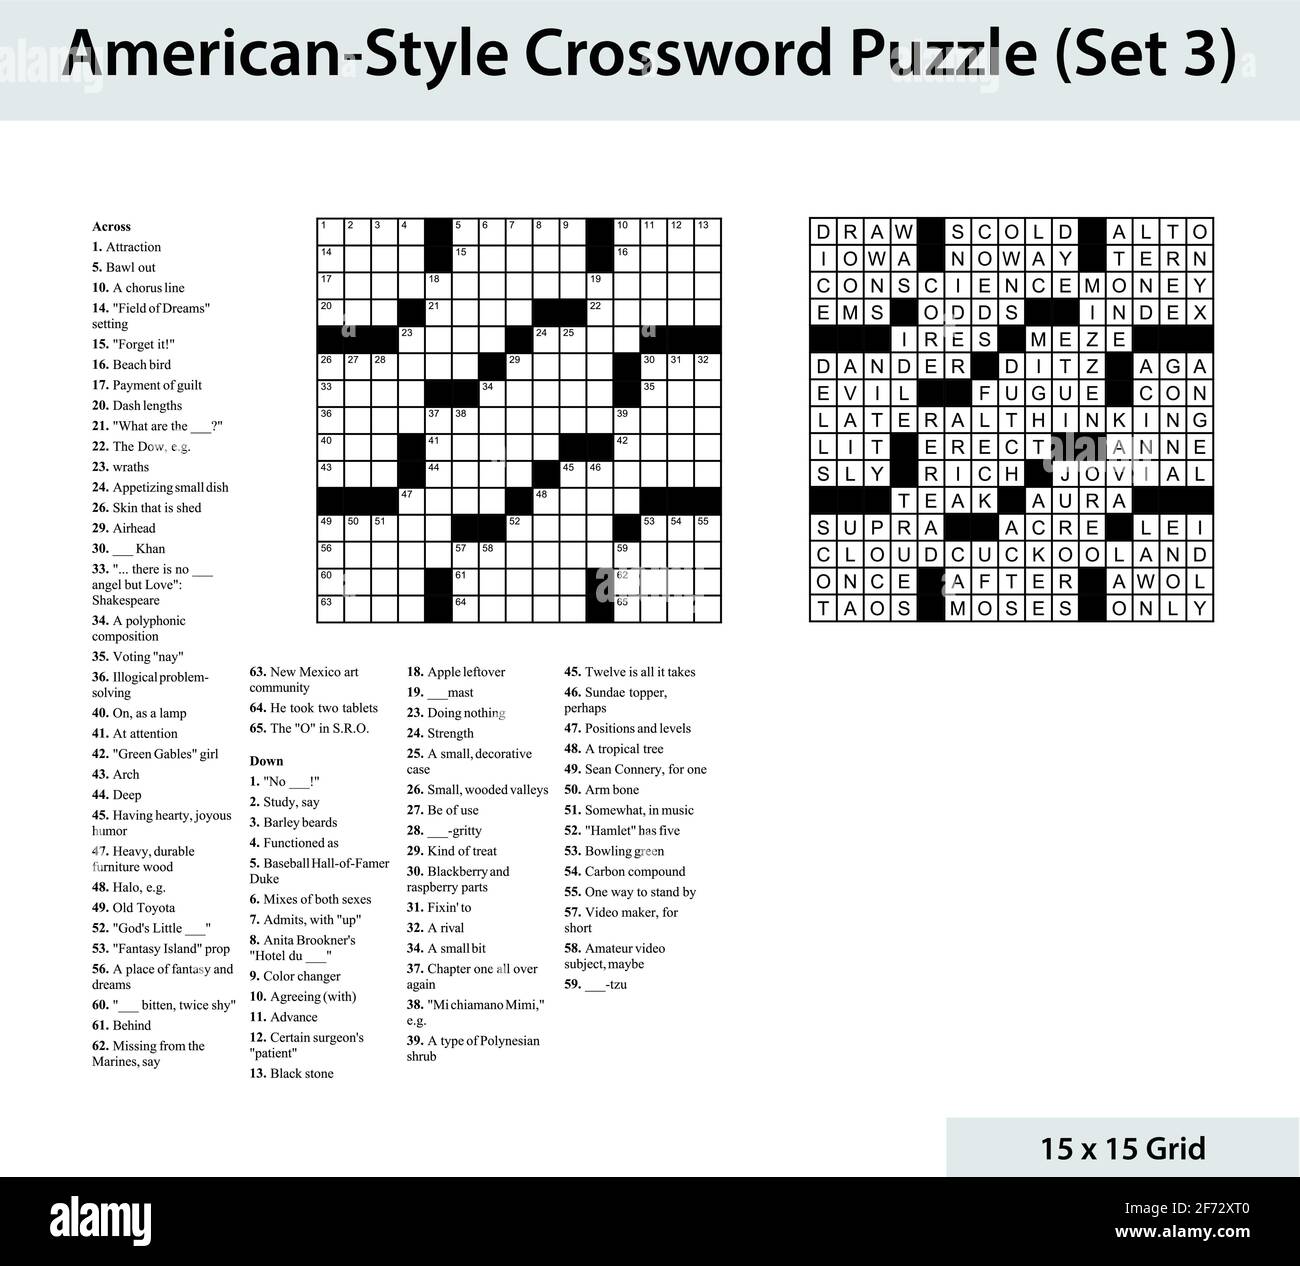 Tupical fan dick clark american bandstand nyt crossword